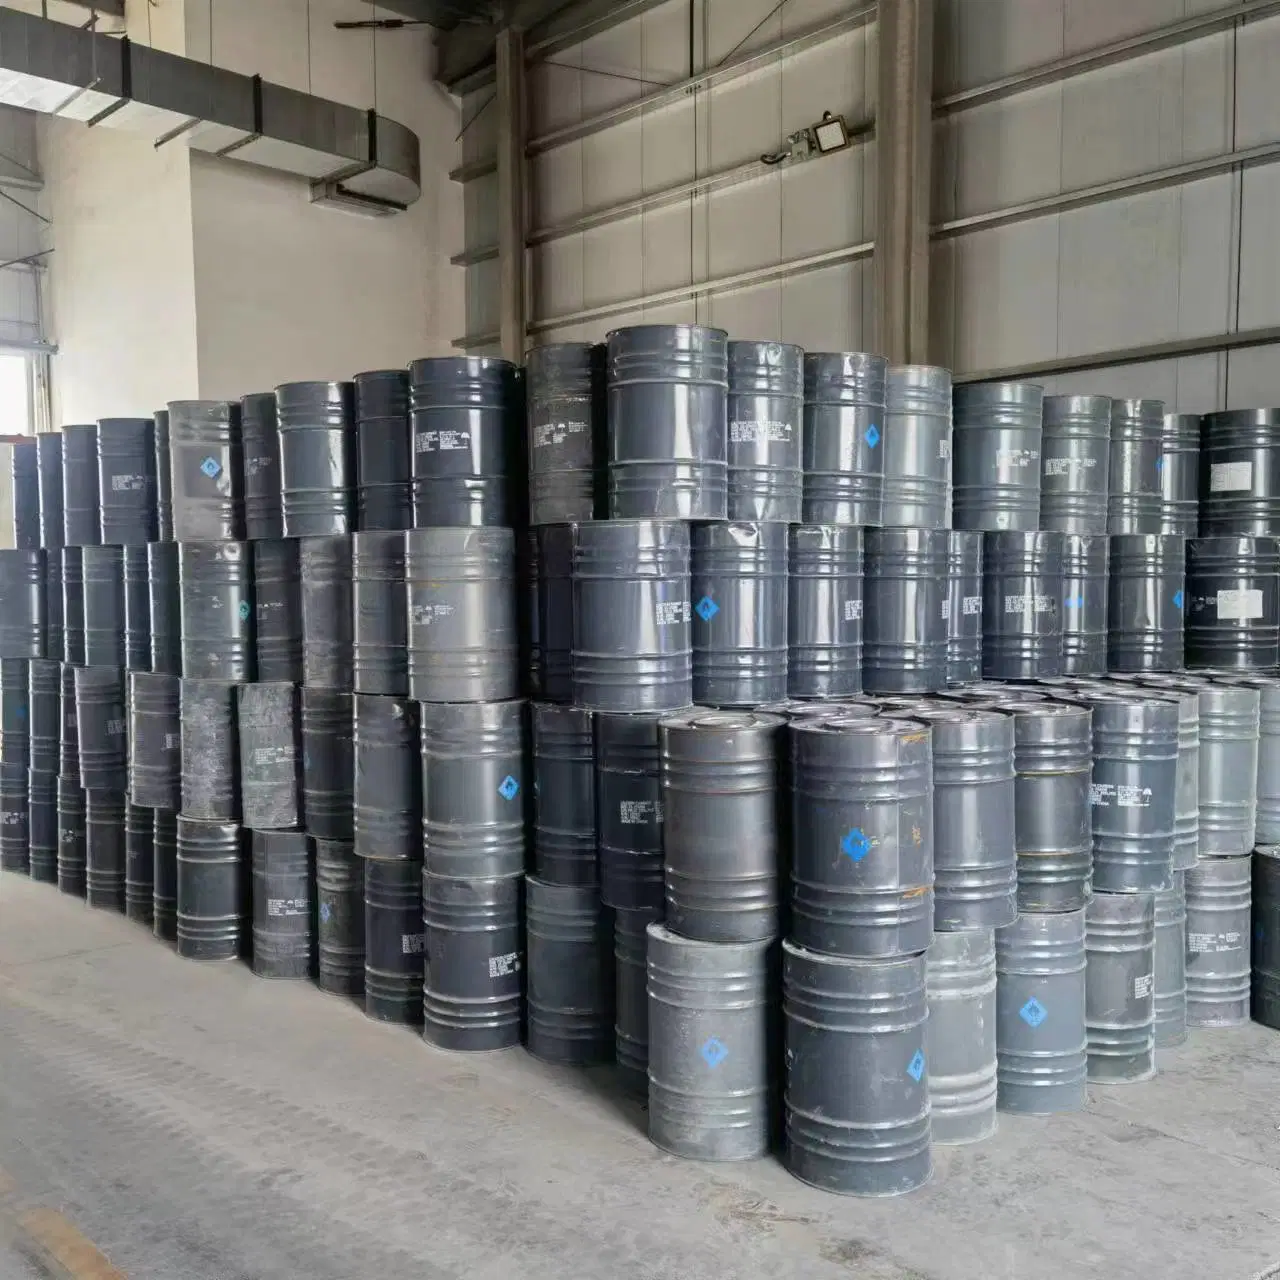 Factory Price Calcium Carbide, All Size15-25mm 25-50mm 50-80mm Calcium Carbide Calcium Carbide